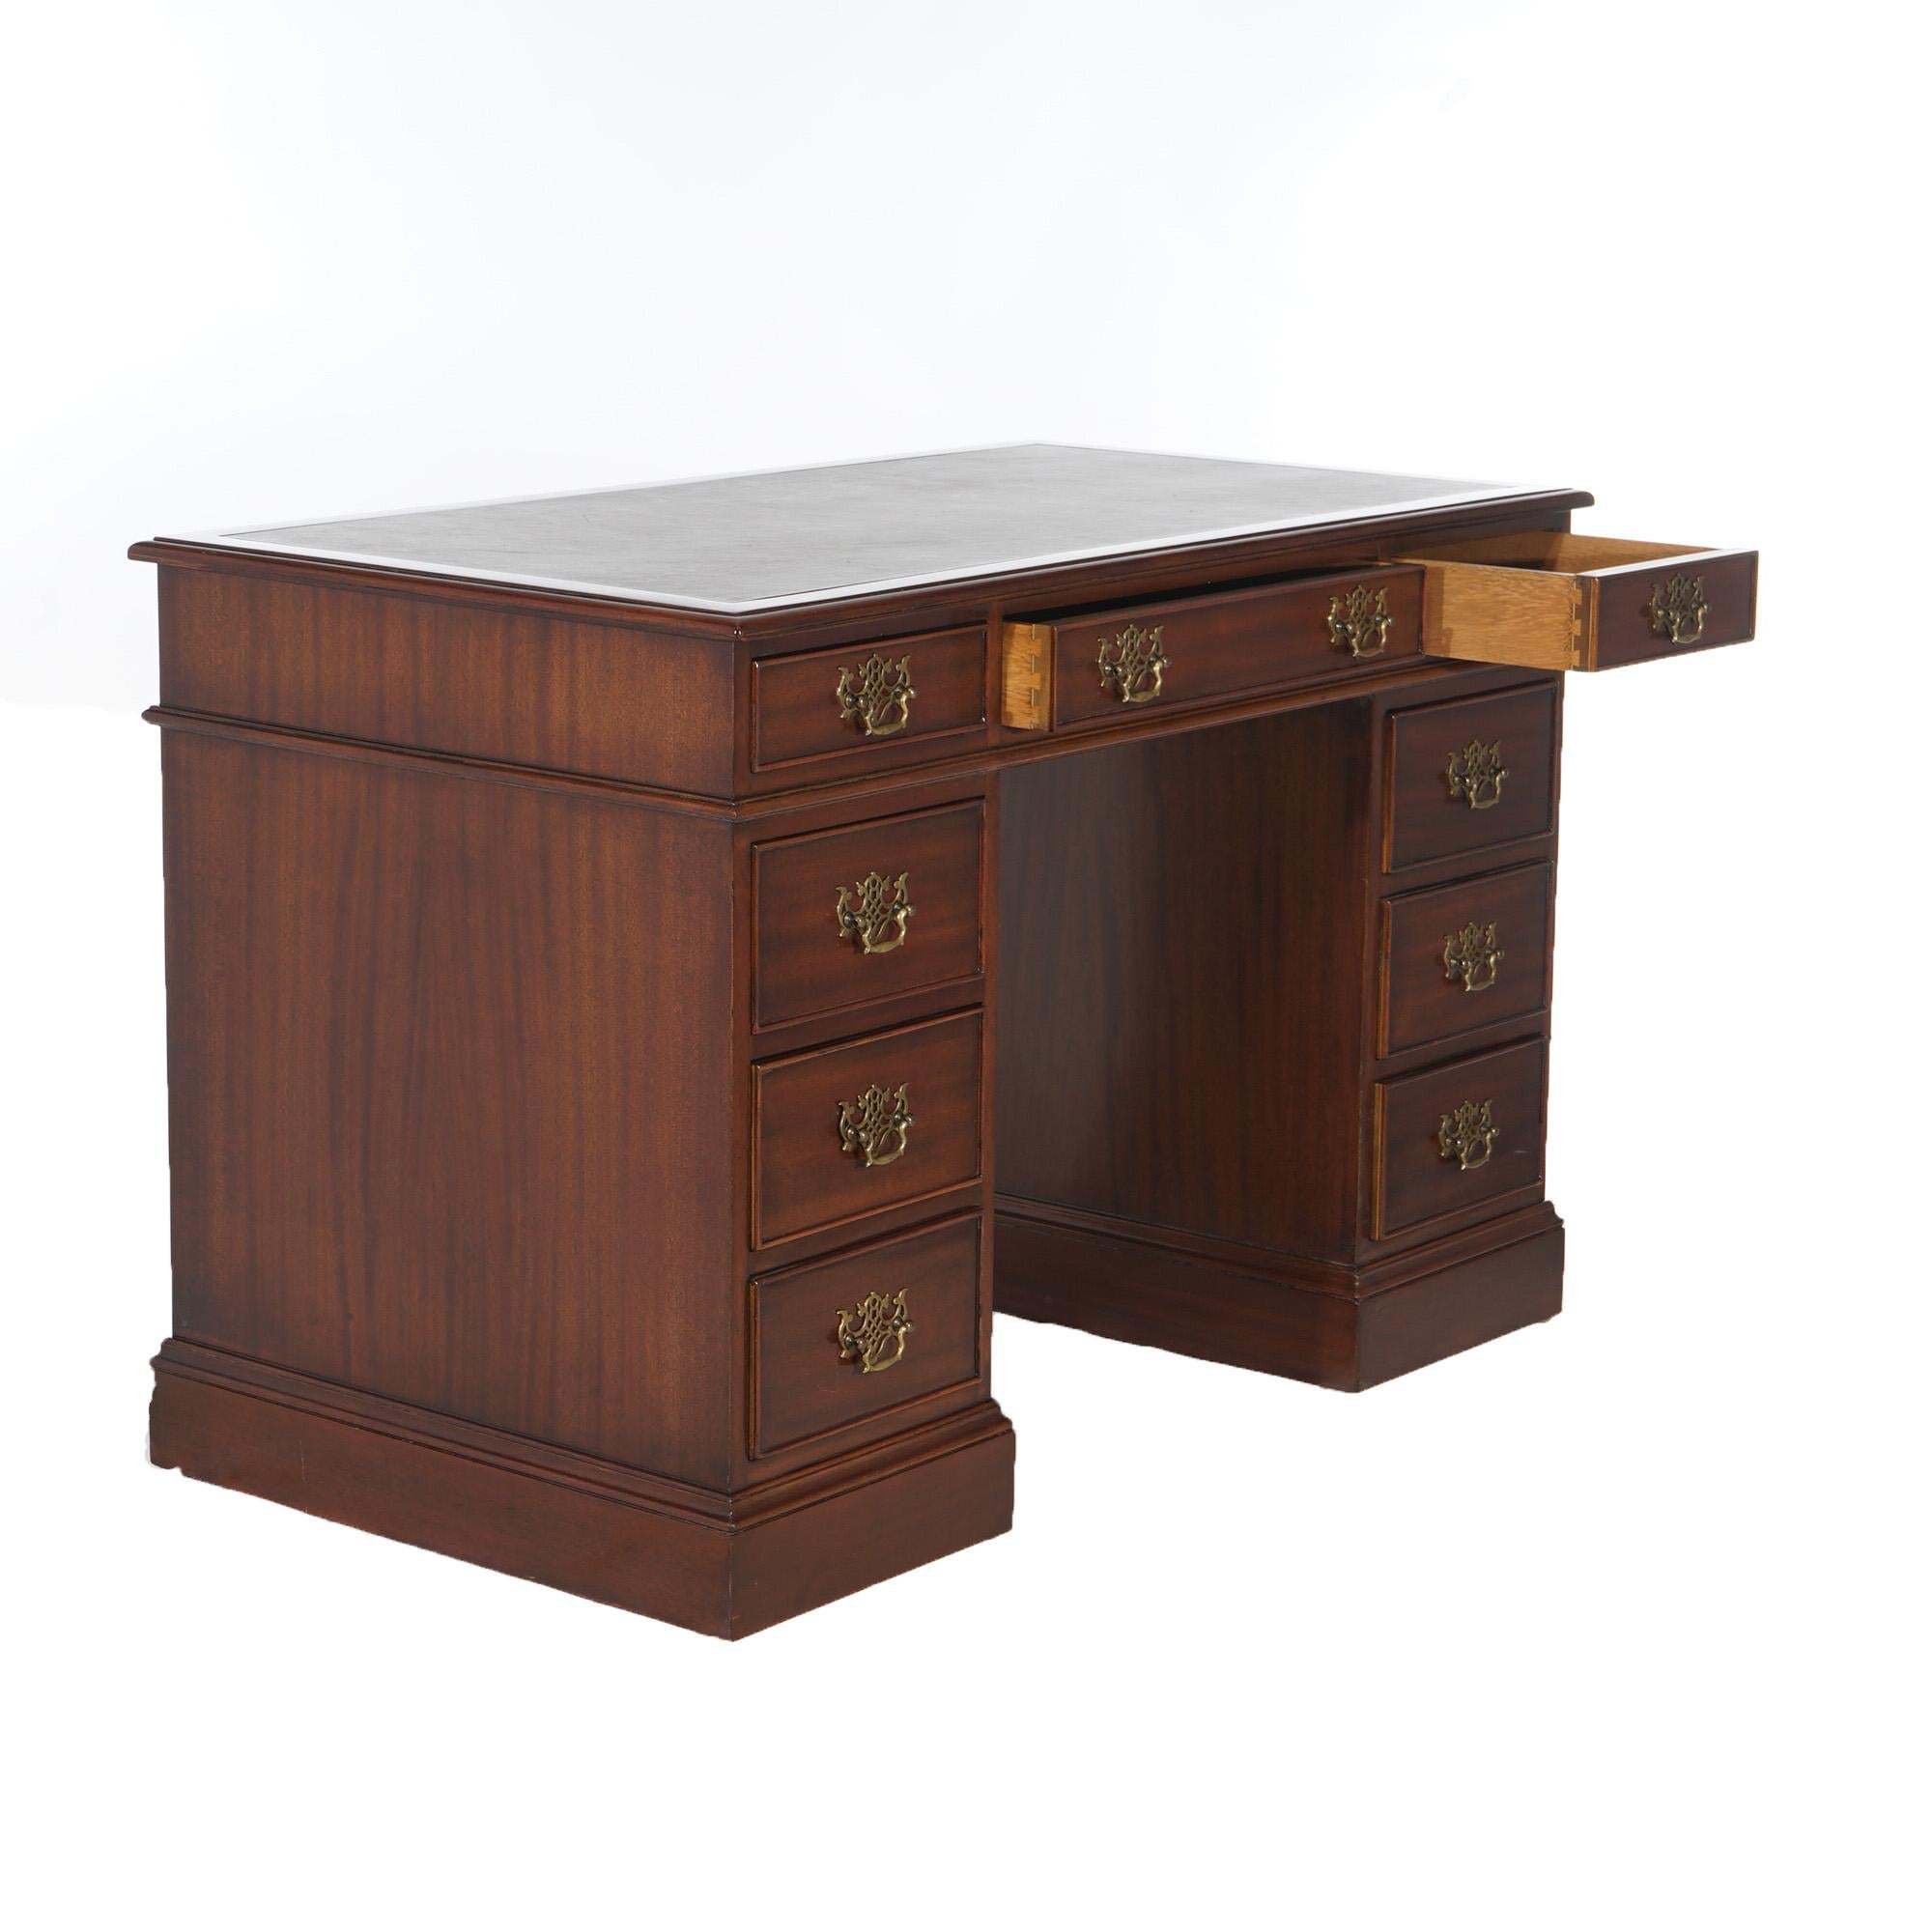 Kittinger Chippendale Style Mahogany Knee Hole Desk with Drawer Towers 20thC For Sale 8